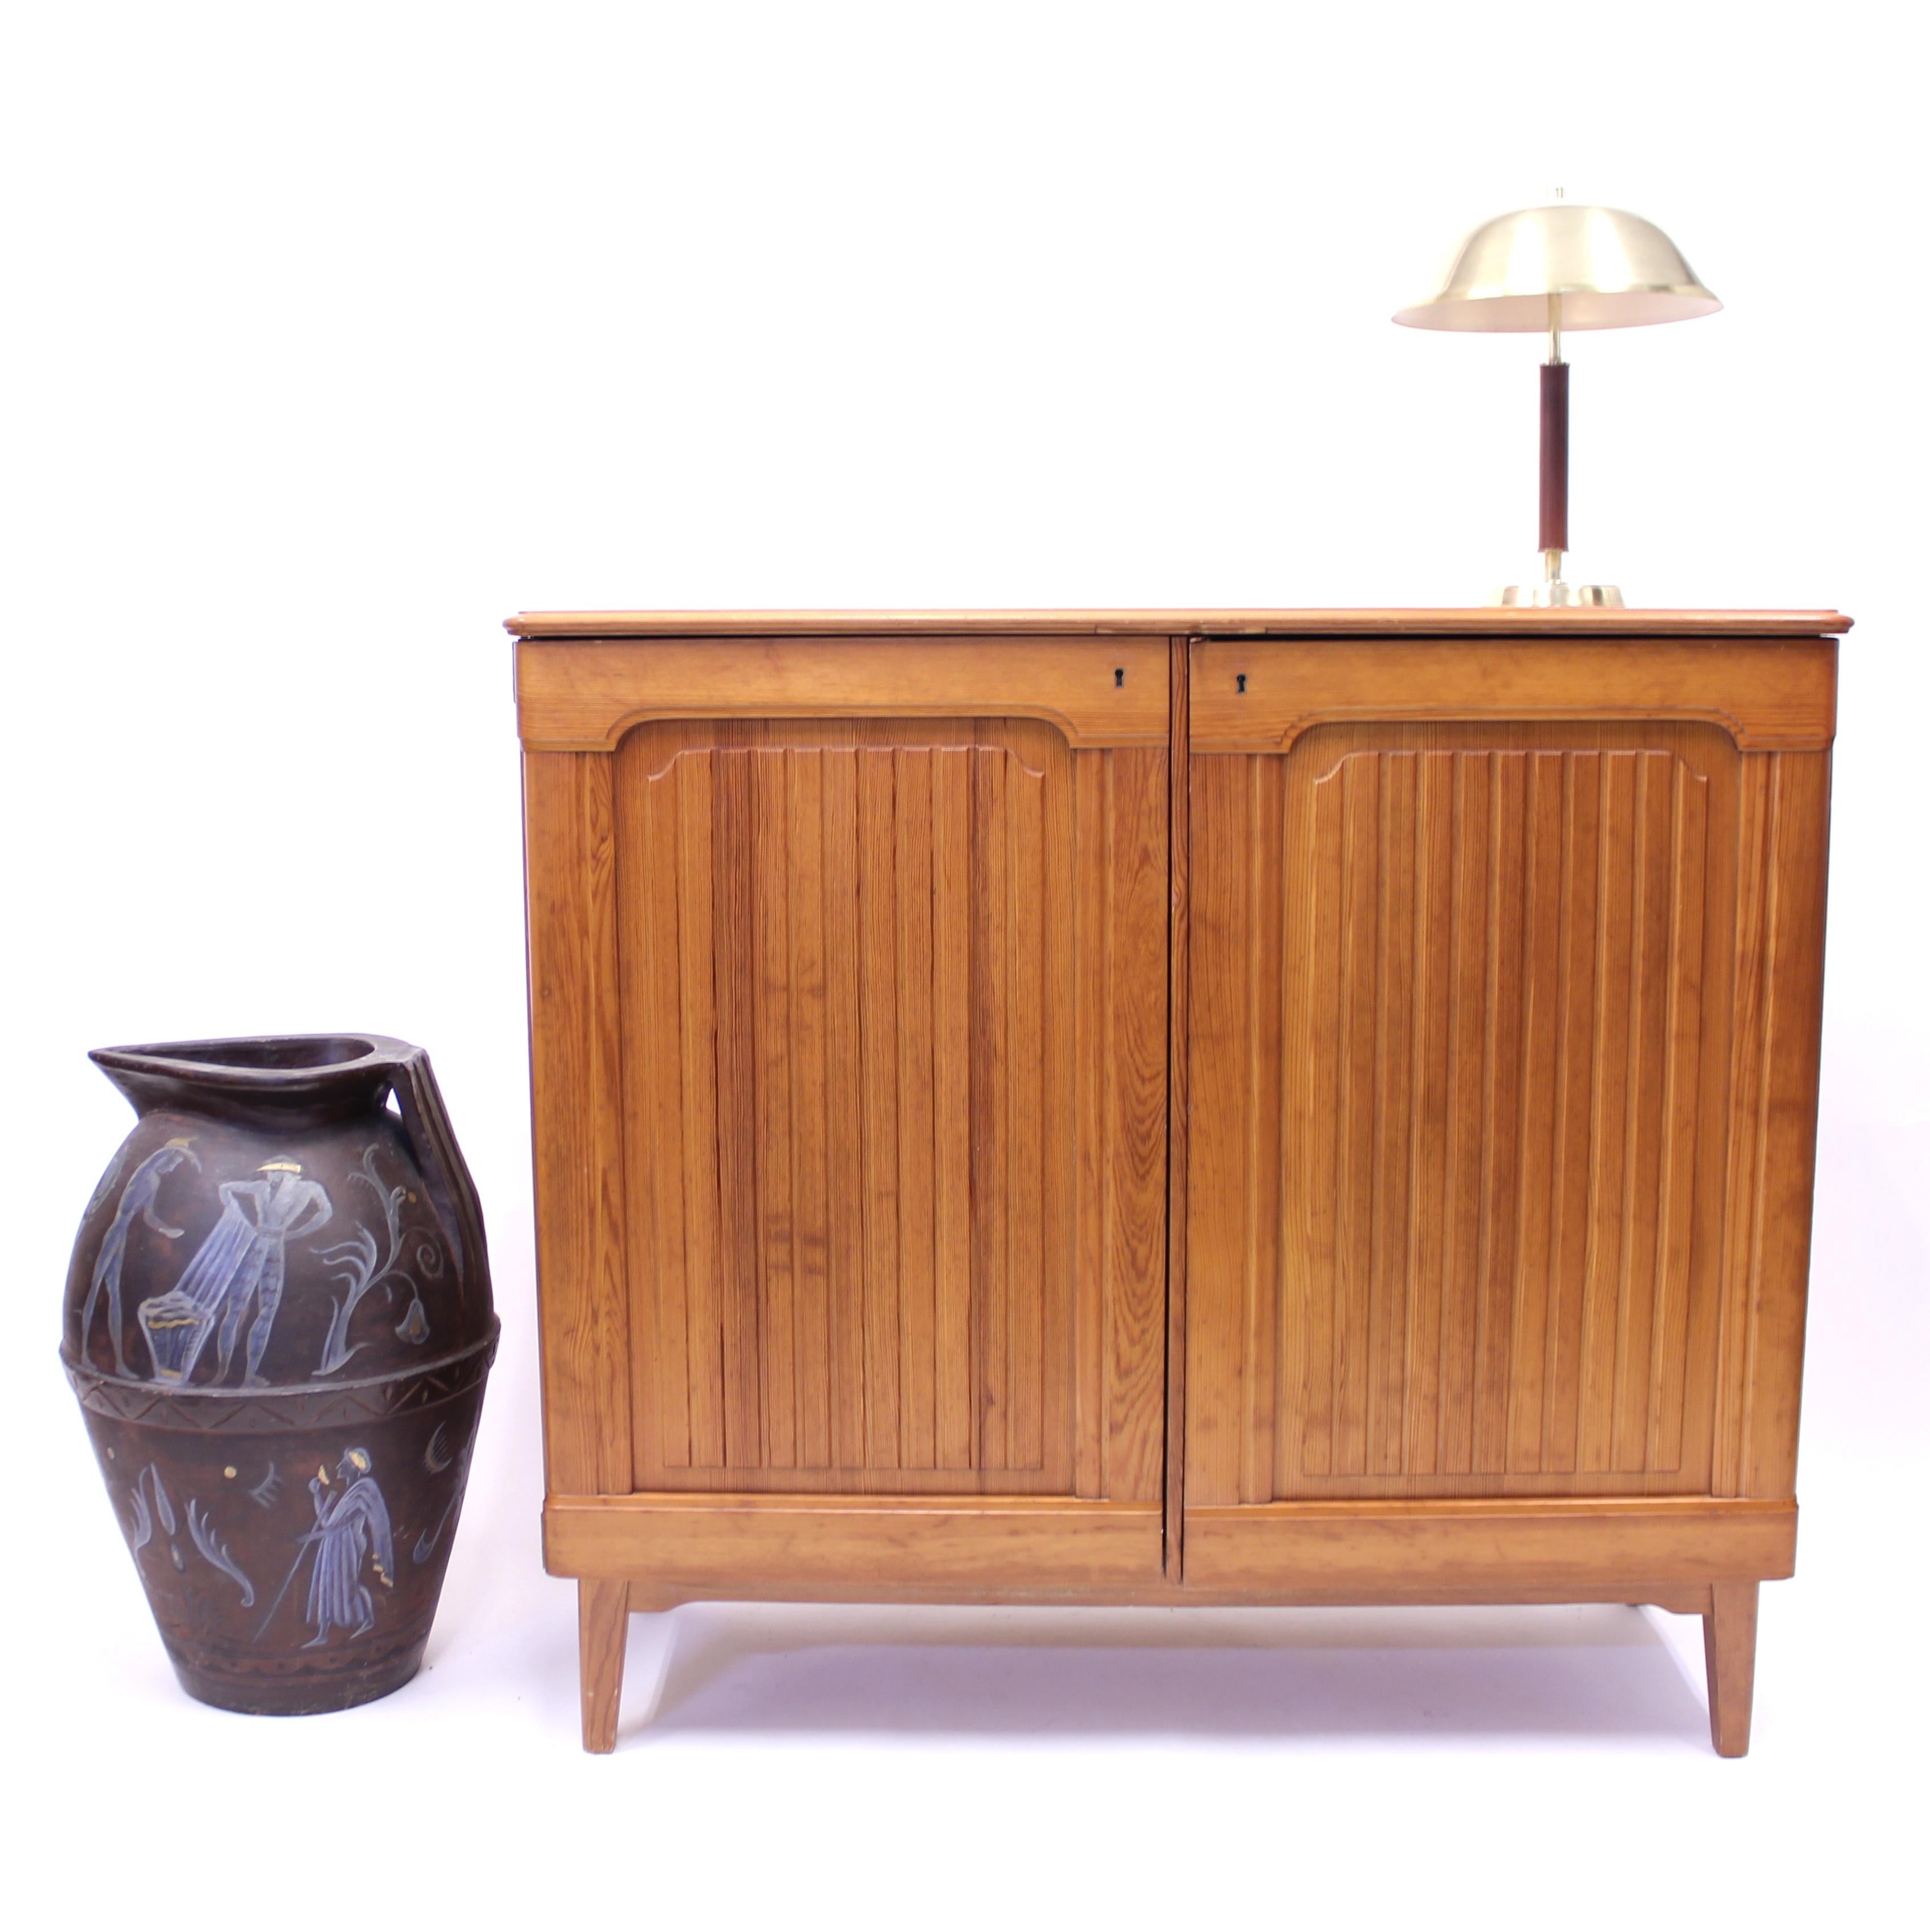 Rare Swedish midcentury pine cabinet manufactured by Svensk Fur and most likely designed by Göran Malmvall who has done most of the designs for the firm. Made in te 1950s. A very typical so called 